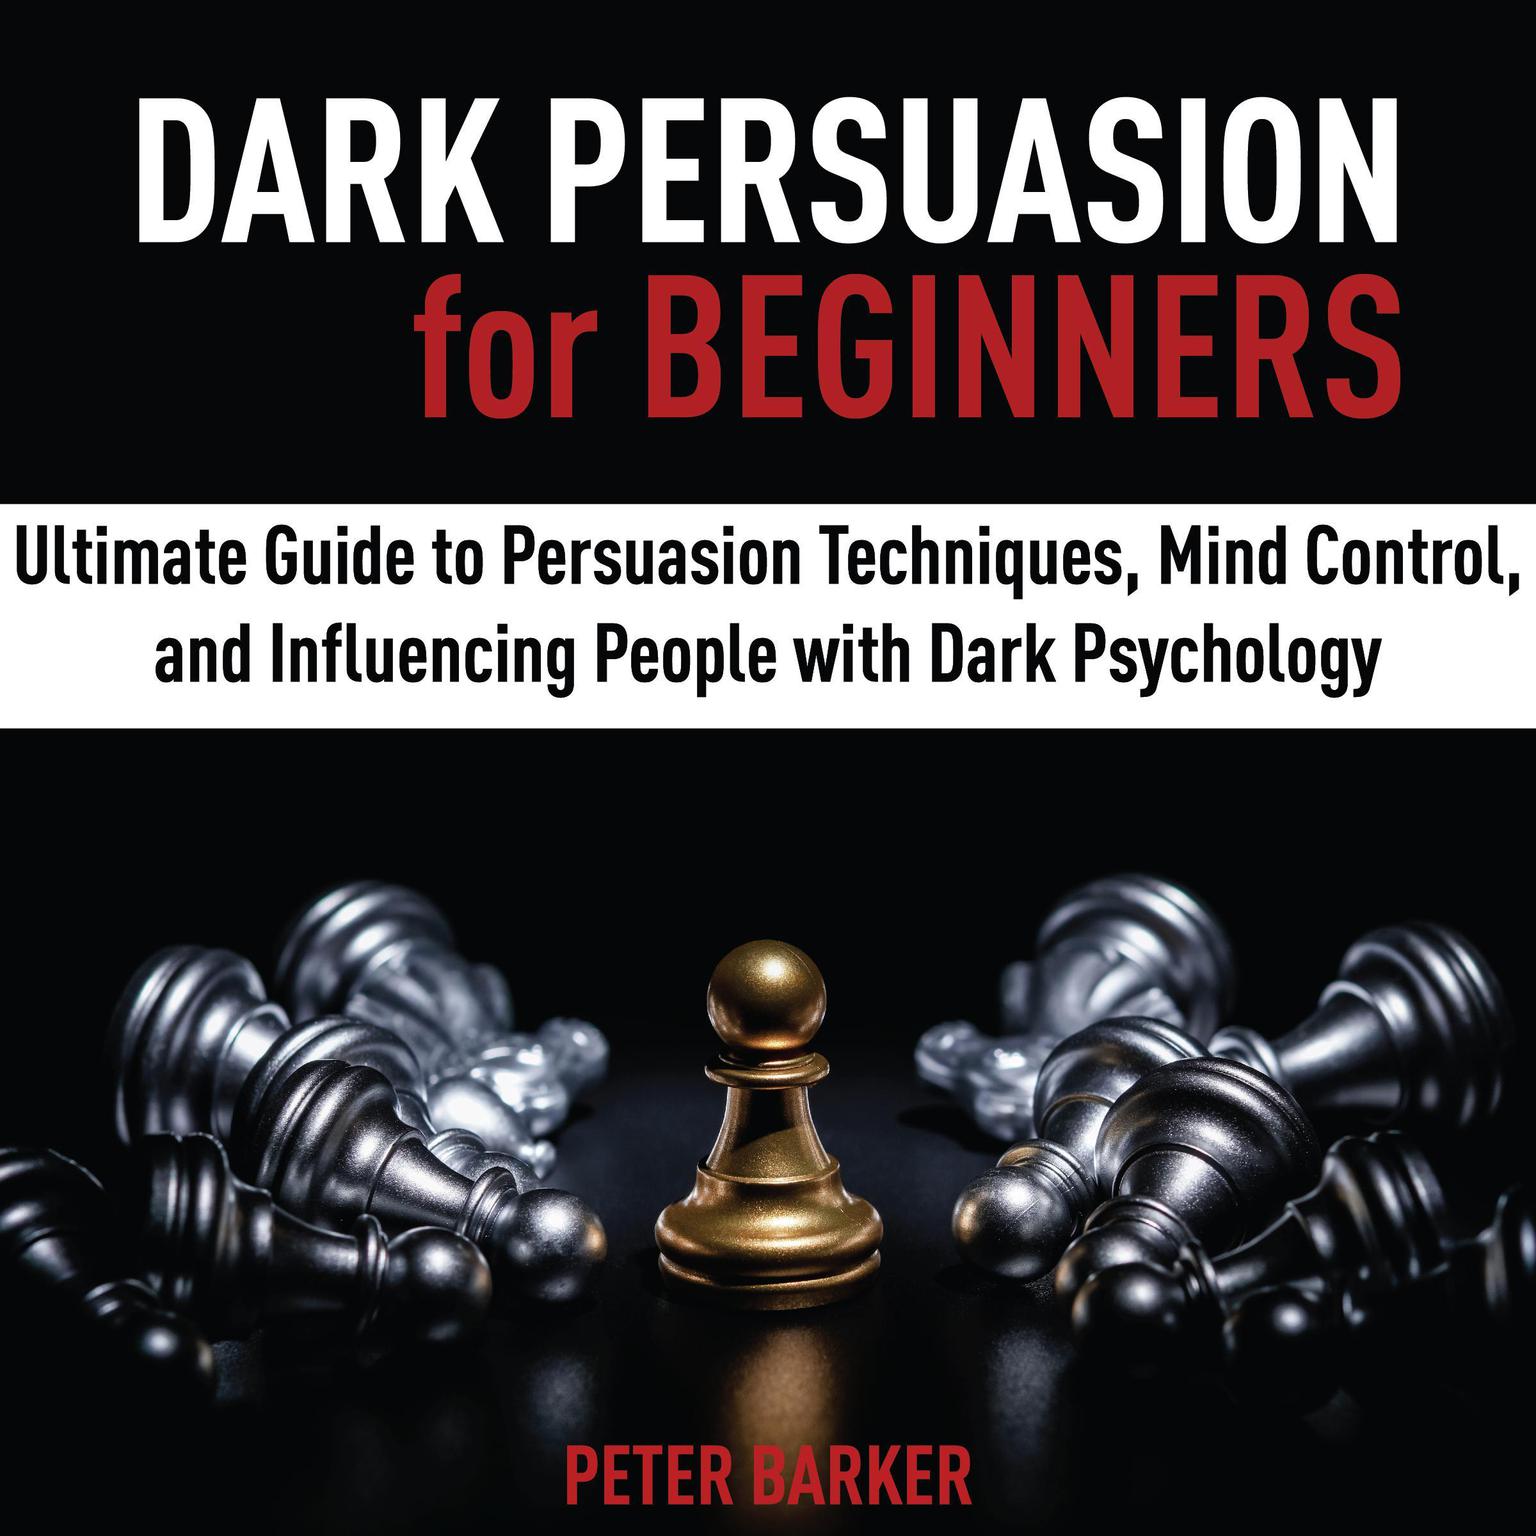 Dark Persuasion for Beginners: Ultimate Guide to Persuasion Techniques, Mind Control, and Influencing People with Dark Psychology Audiobook, by Peter Barker